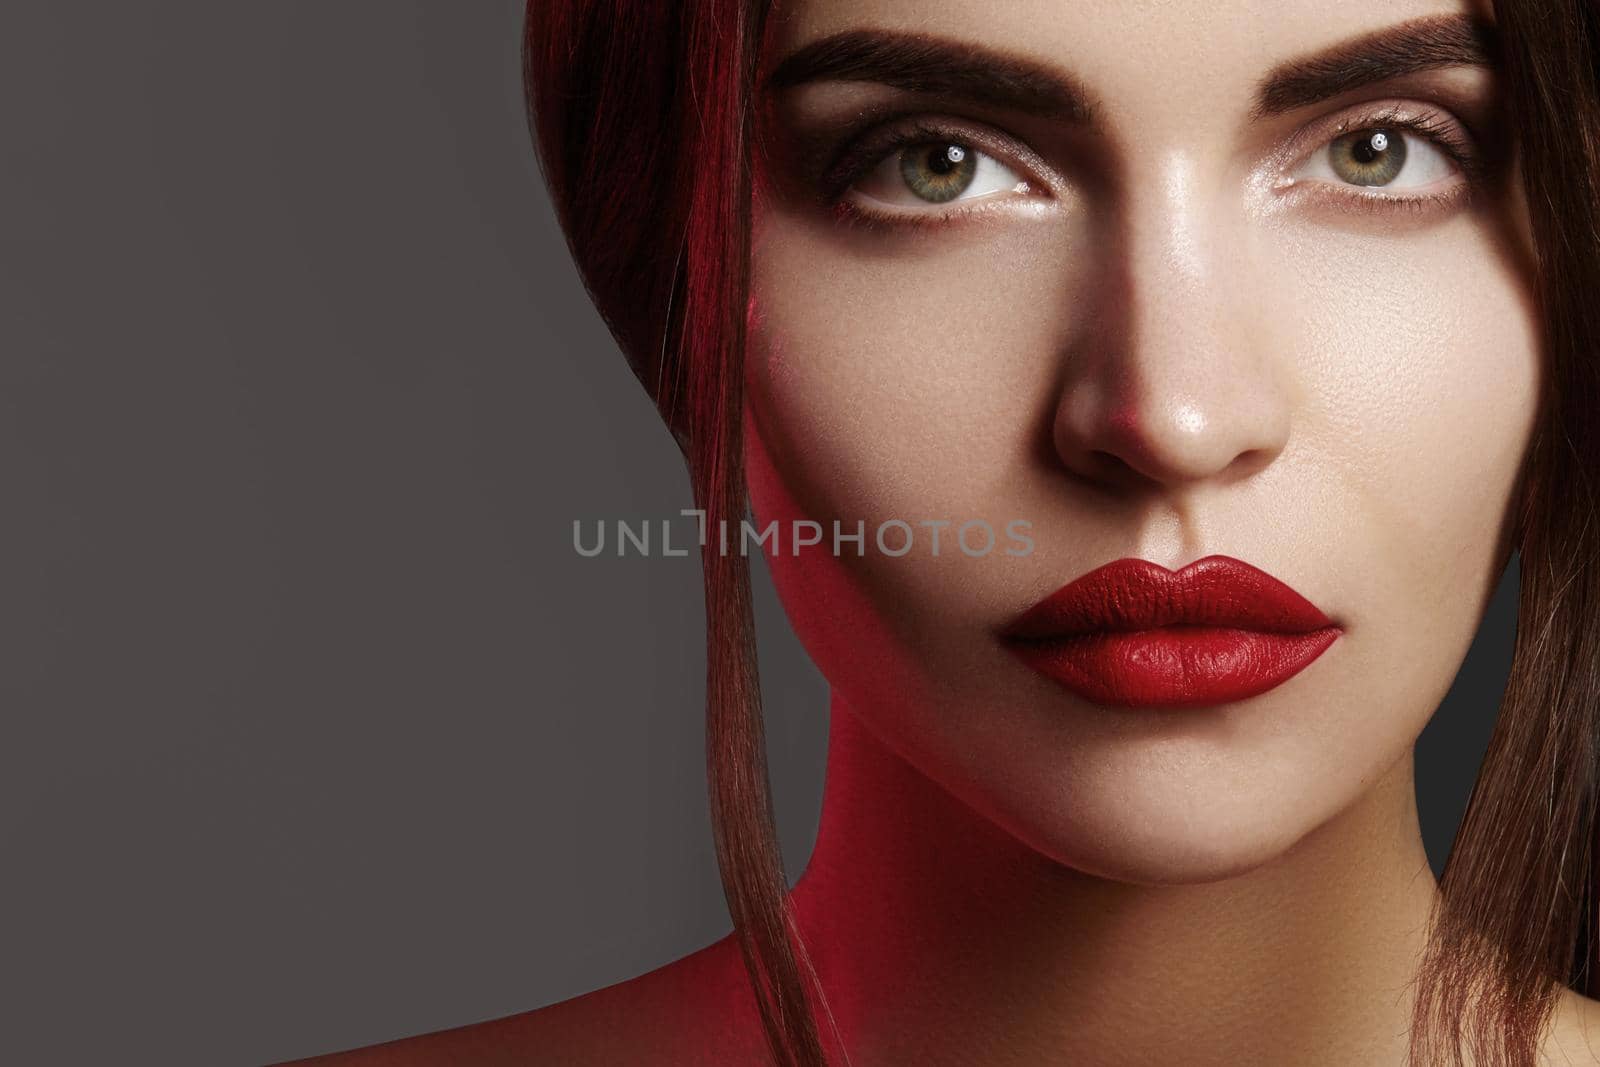 Closeup portrait with of beautiful woman face. Red color of fashion lip makeup, clean shiny skin and strong eyebrows. Makeup and cosmetic. Beauty style